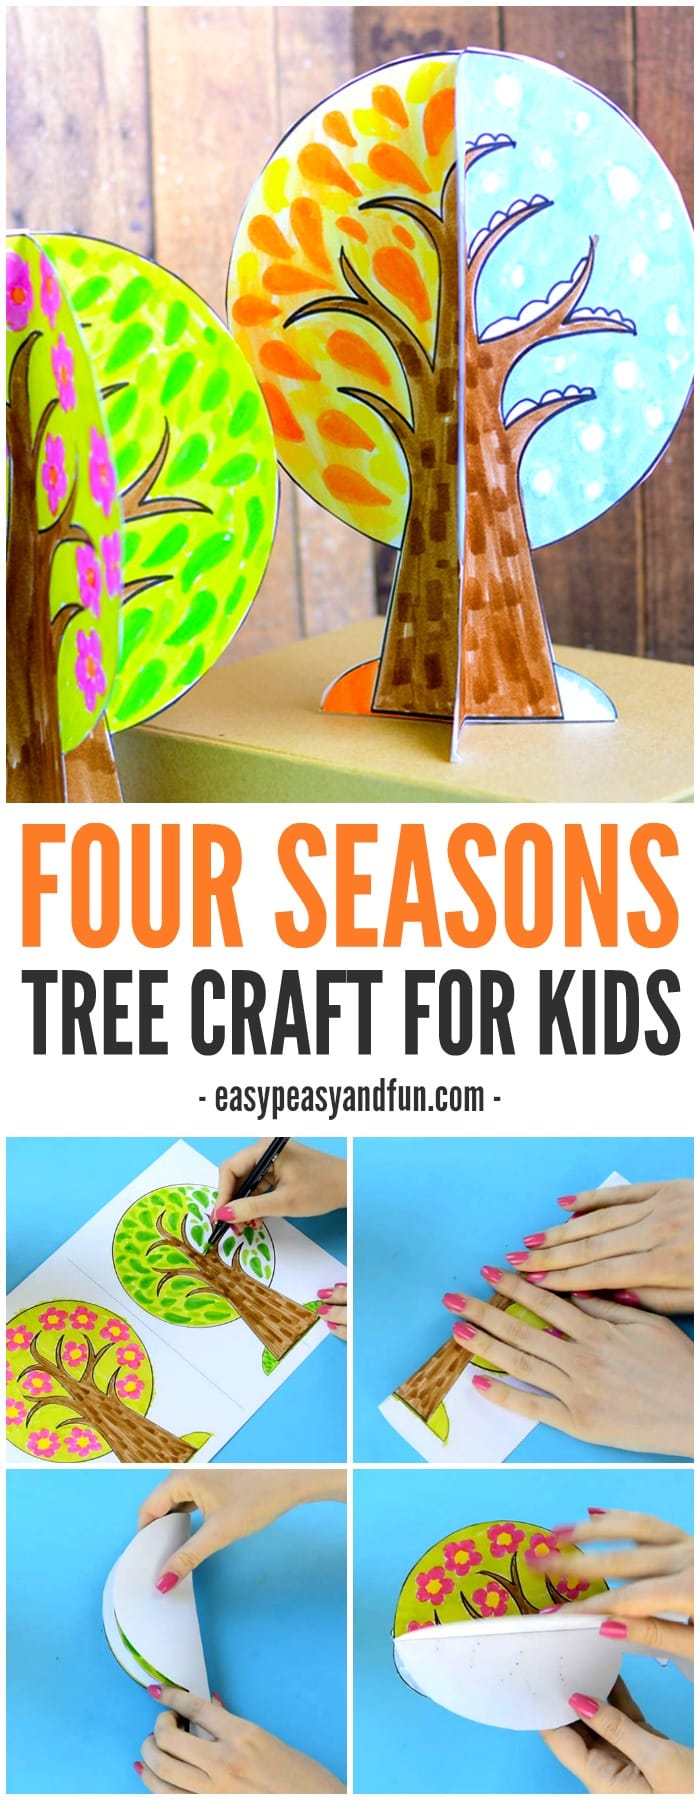 Lovely Four Seasons Tree Craft for Kids to Make